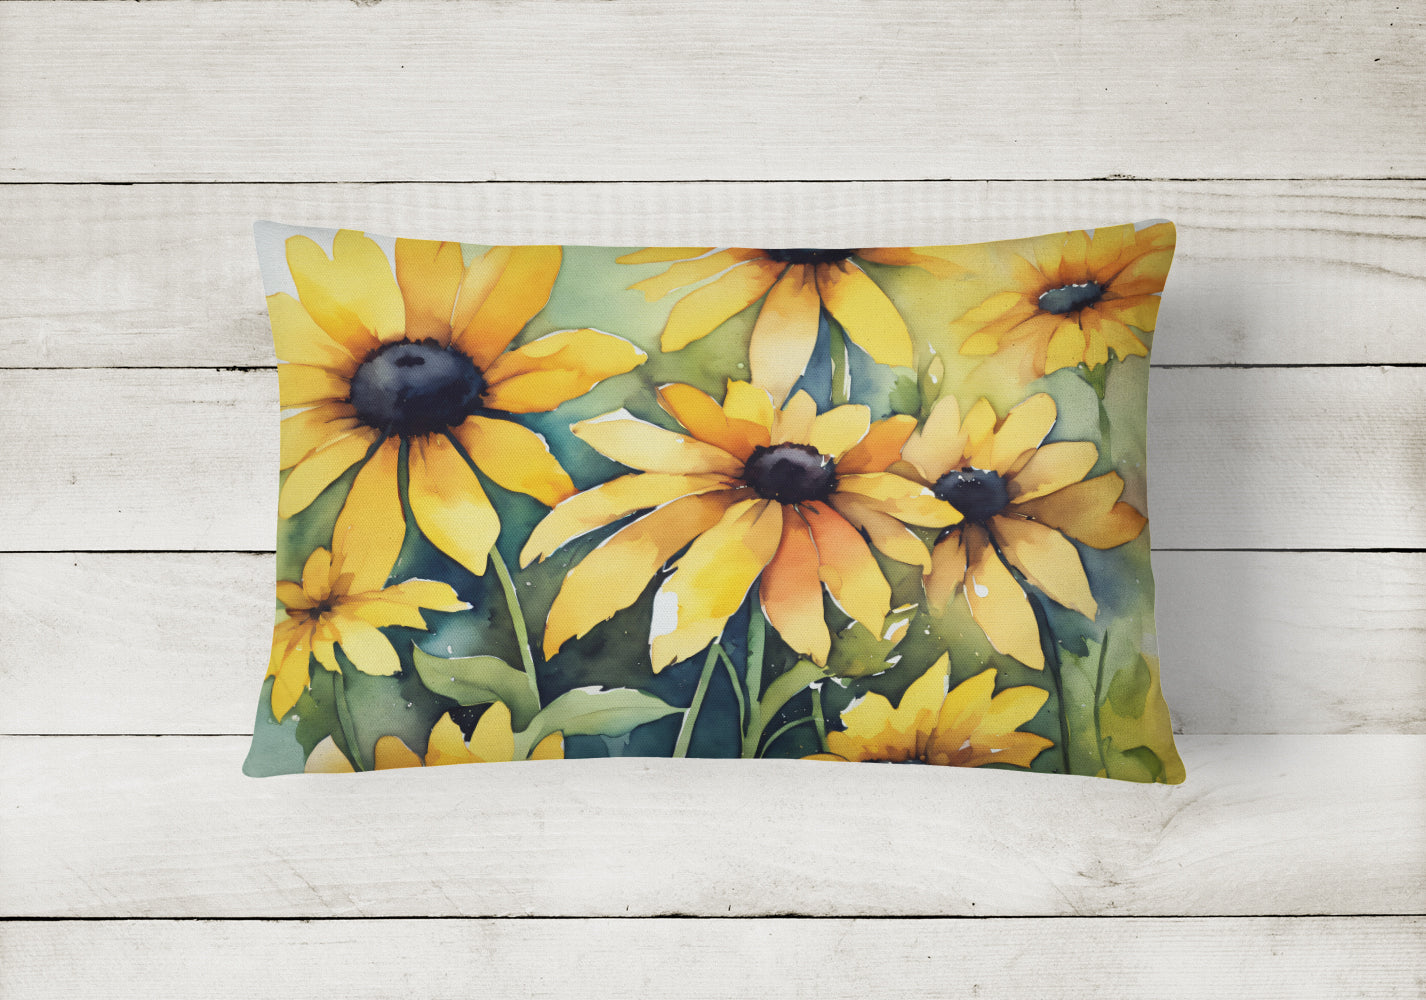 Buy this Maryland Black-Eyed Susans in Watercolor Fabric Decorative Pillow